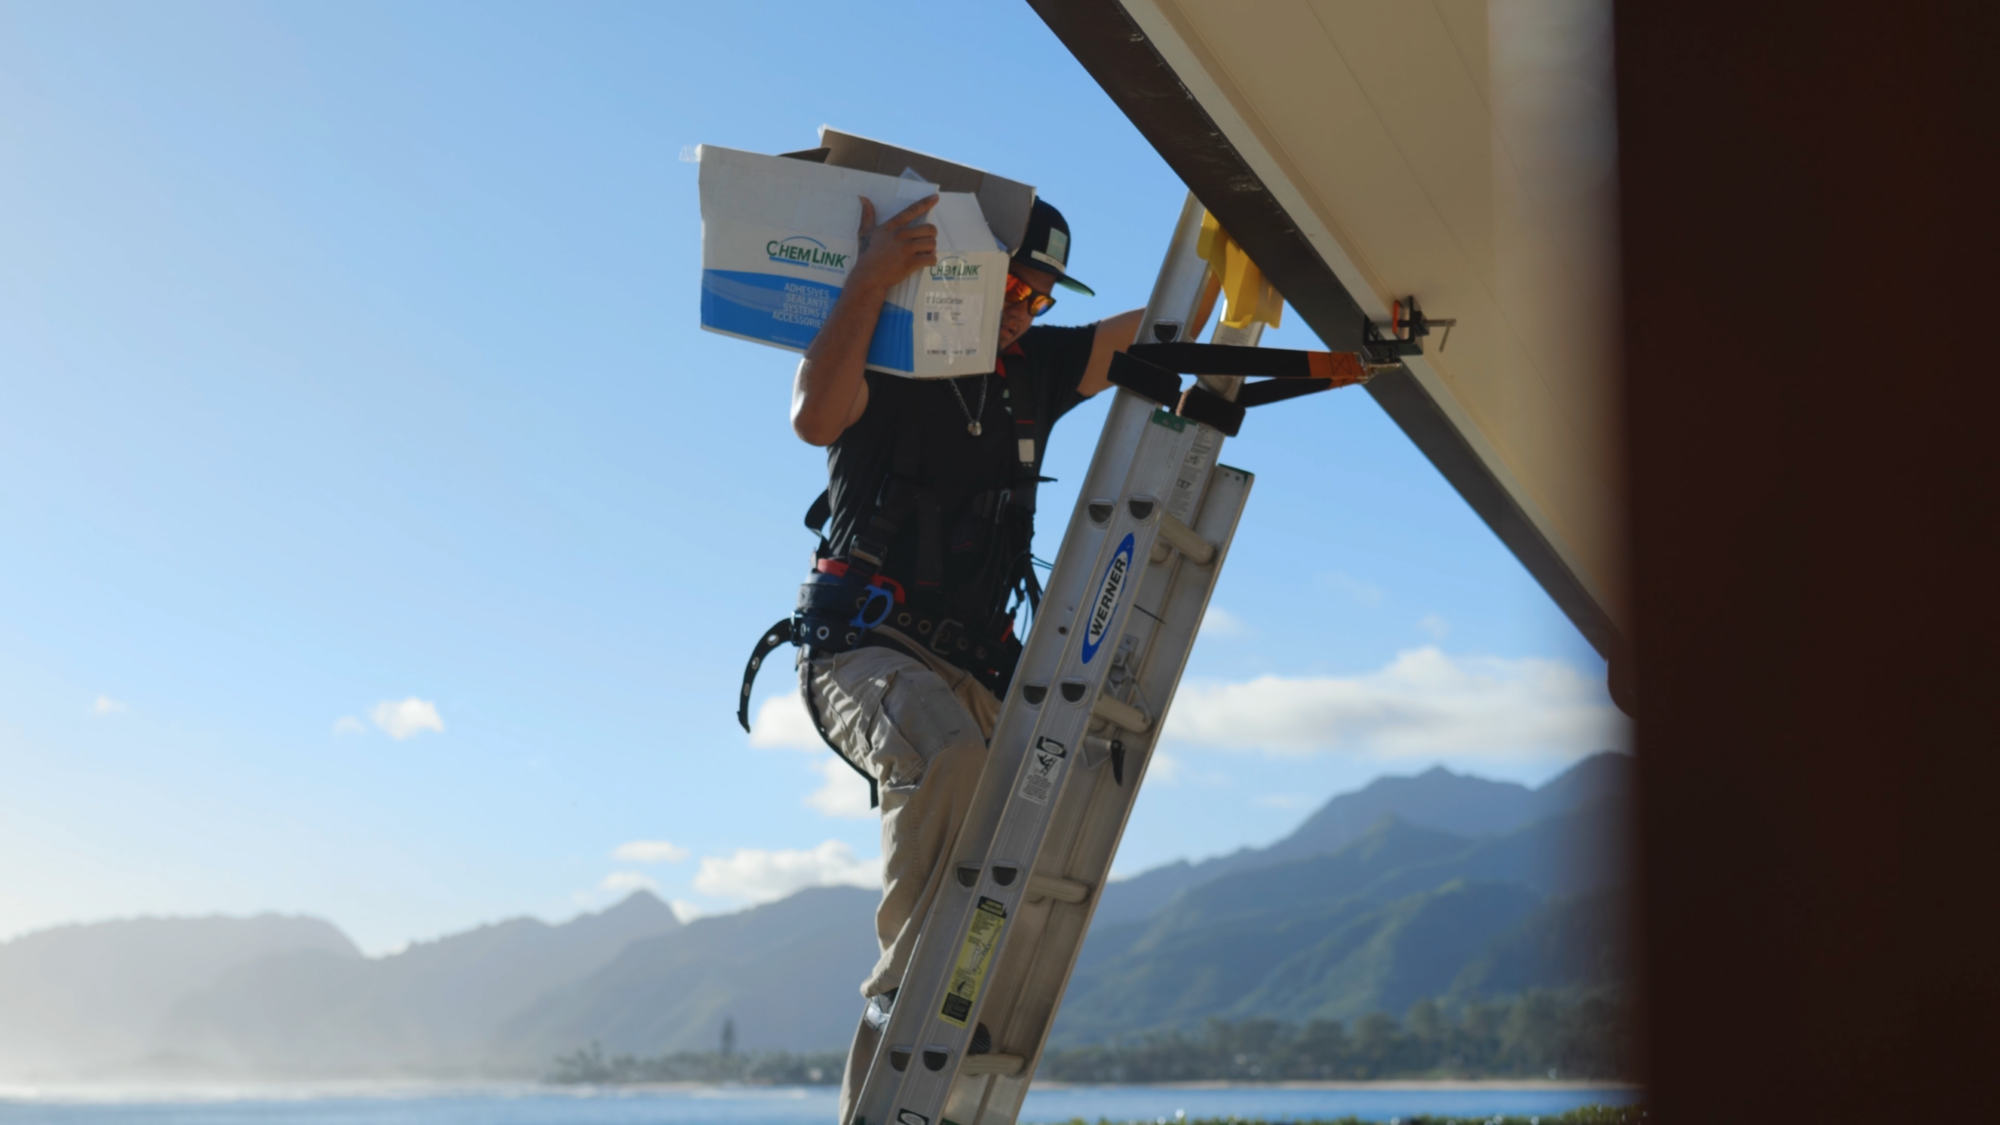 Malama installs and services solar power systems in Hawaii